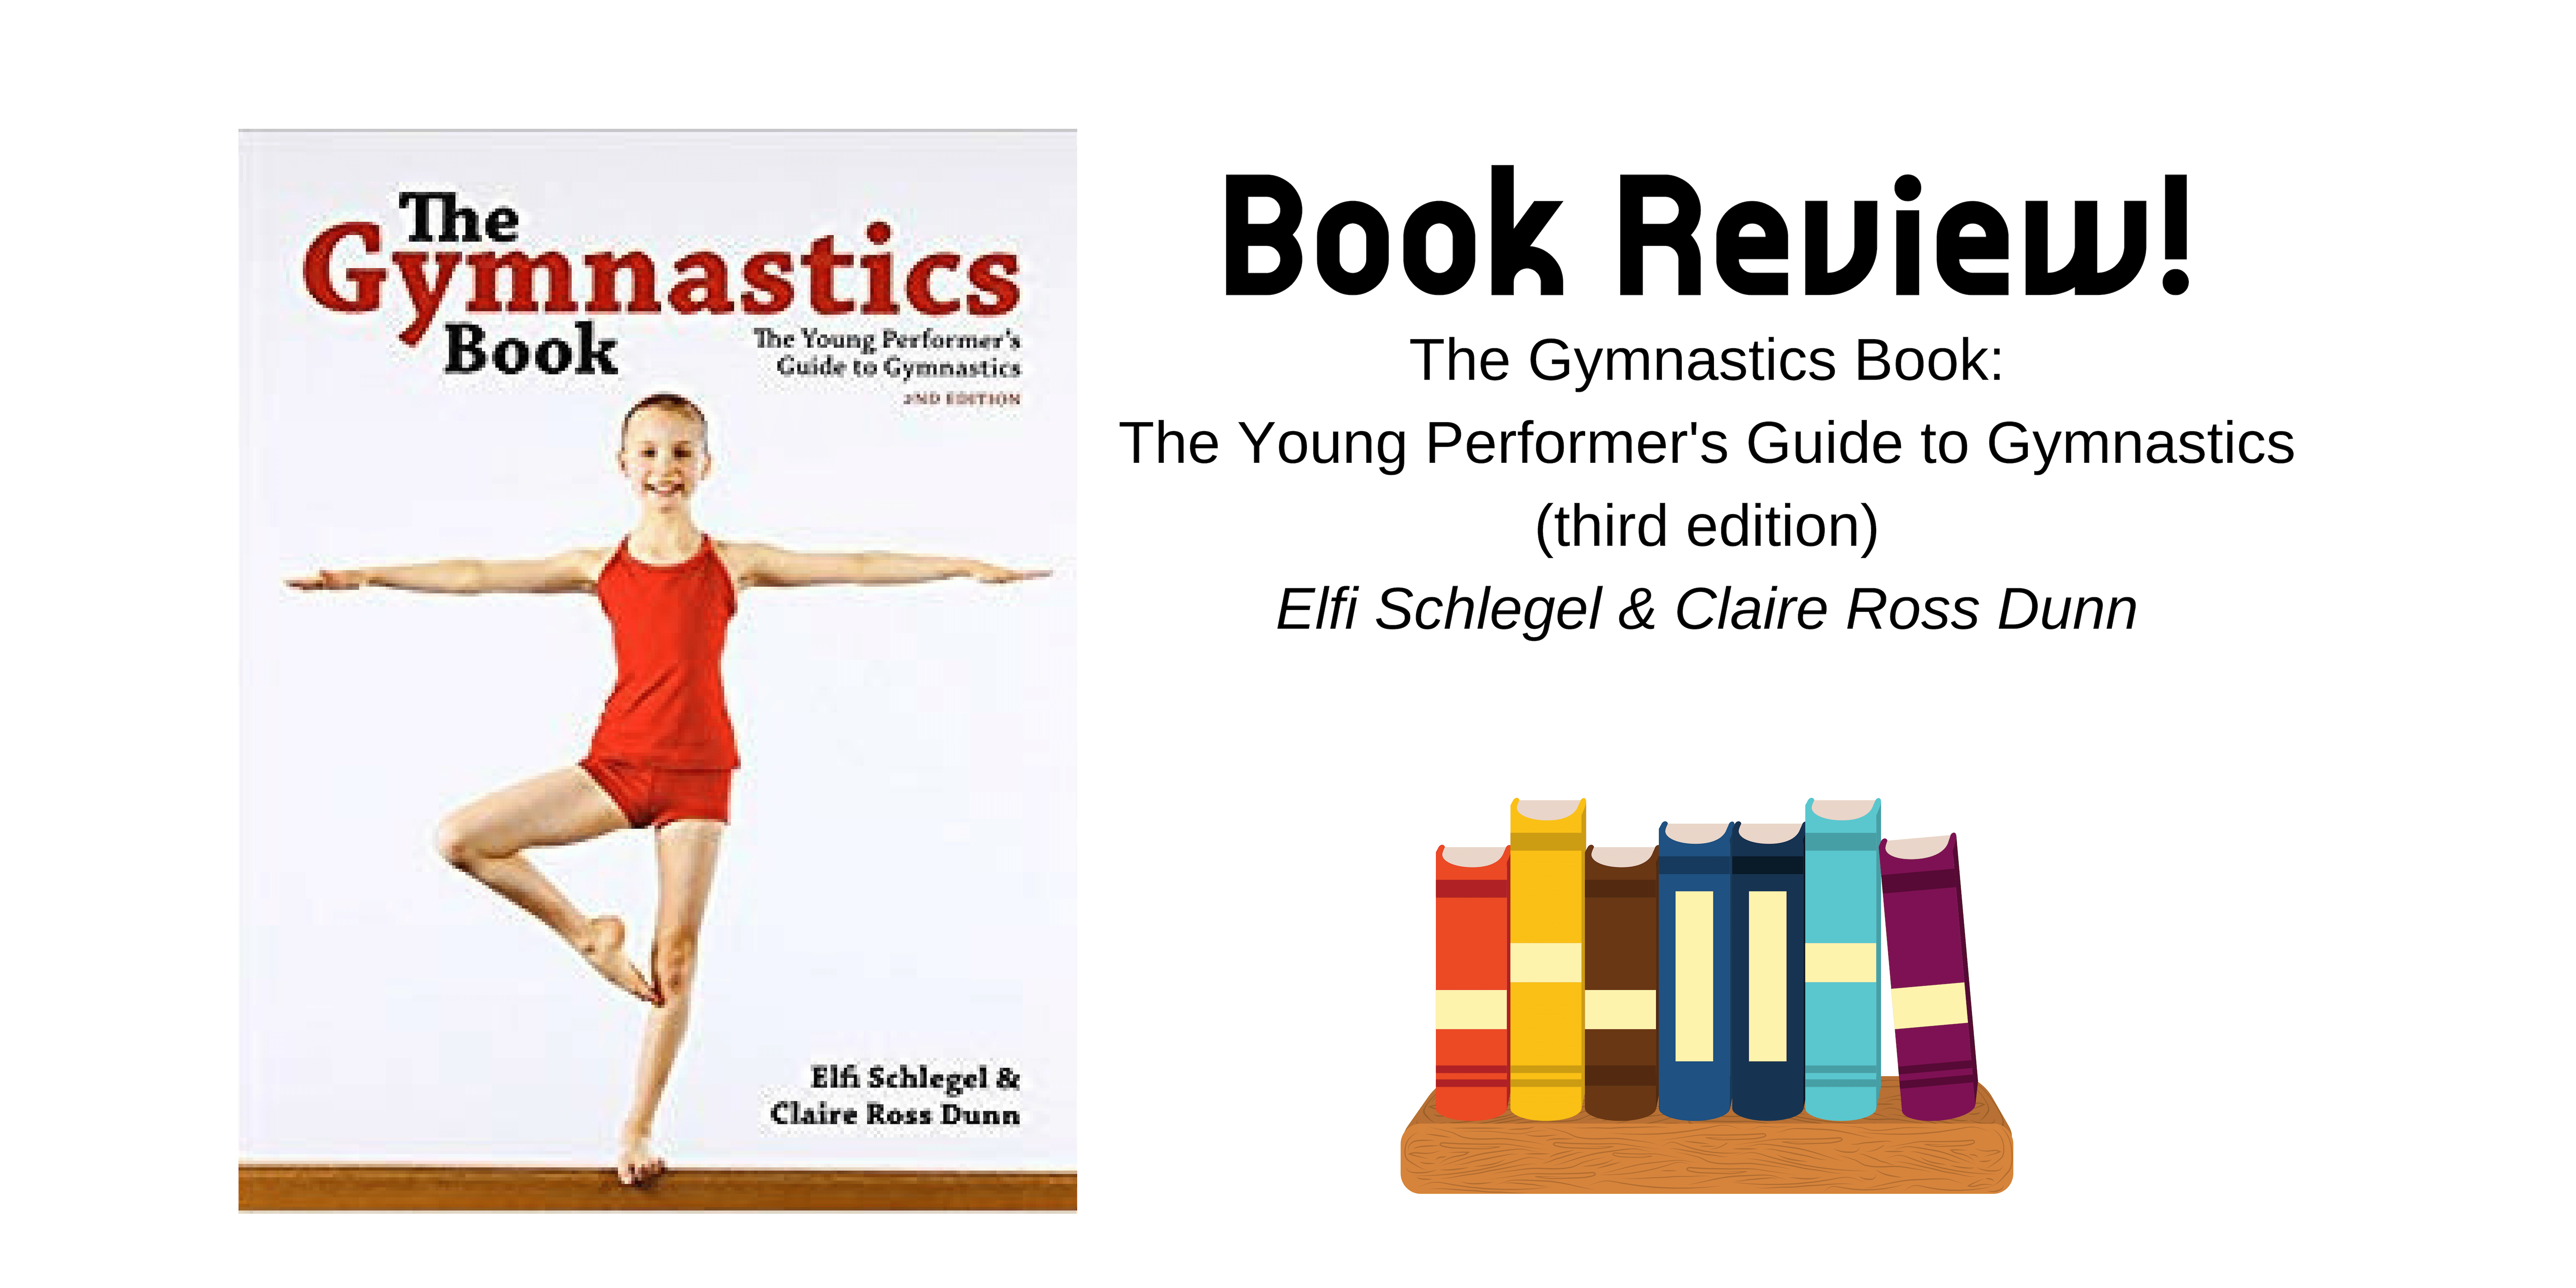 The Gymnastics Book: The Young Performer's Guide to Gymnastics. by Elfi Schlegel & Claire Ross Dunn || Book Review by Recreational Gymnastics Professionals || @recgympros || www.recgympros.com ||